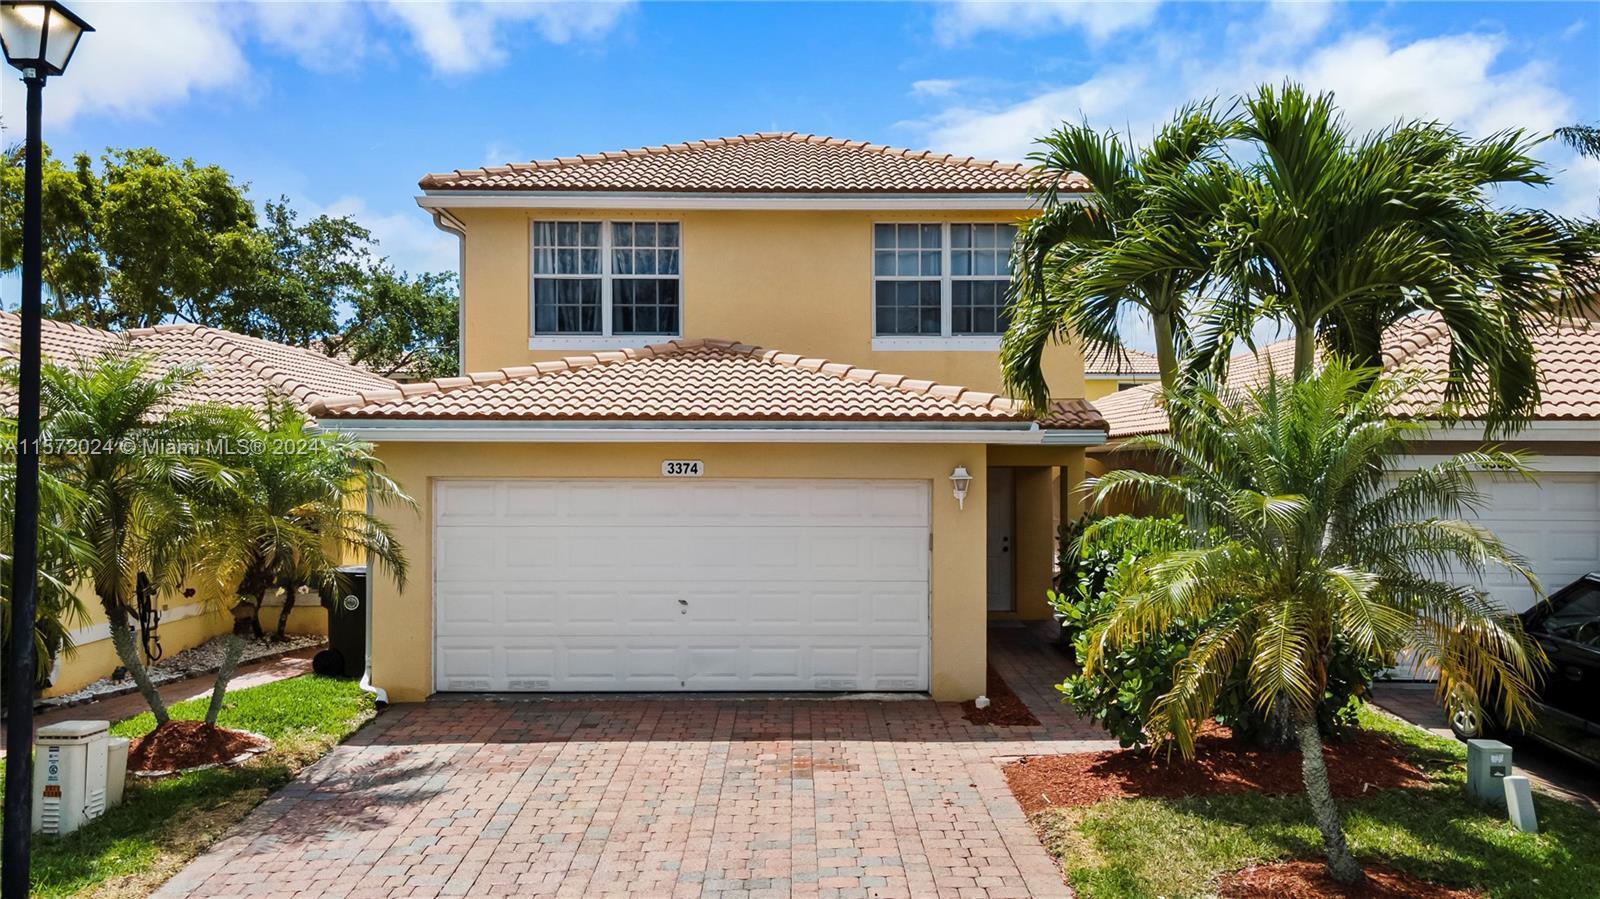 Photo of 3374 Commodore Ct in West Palm Beach, FL